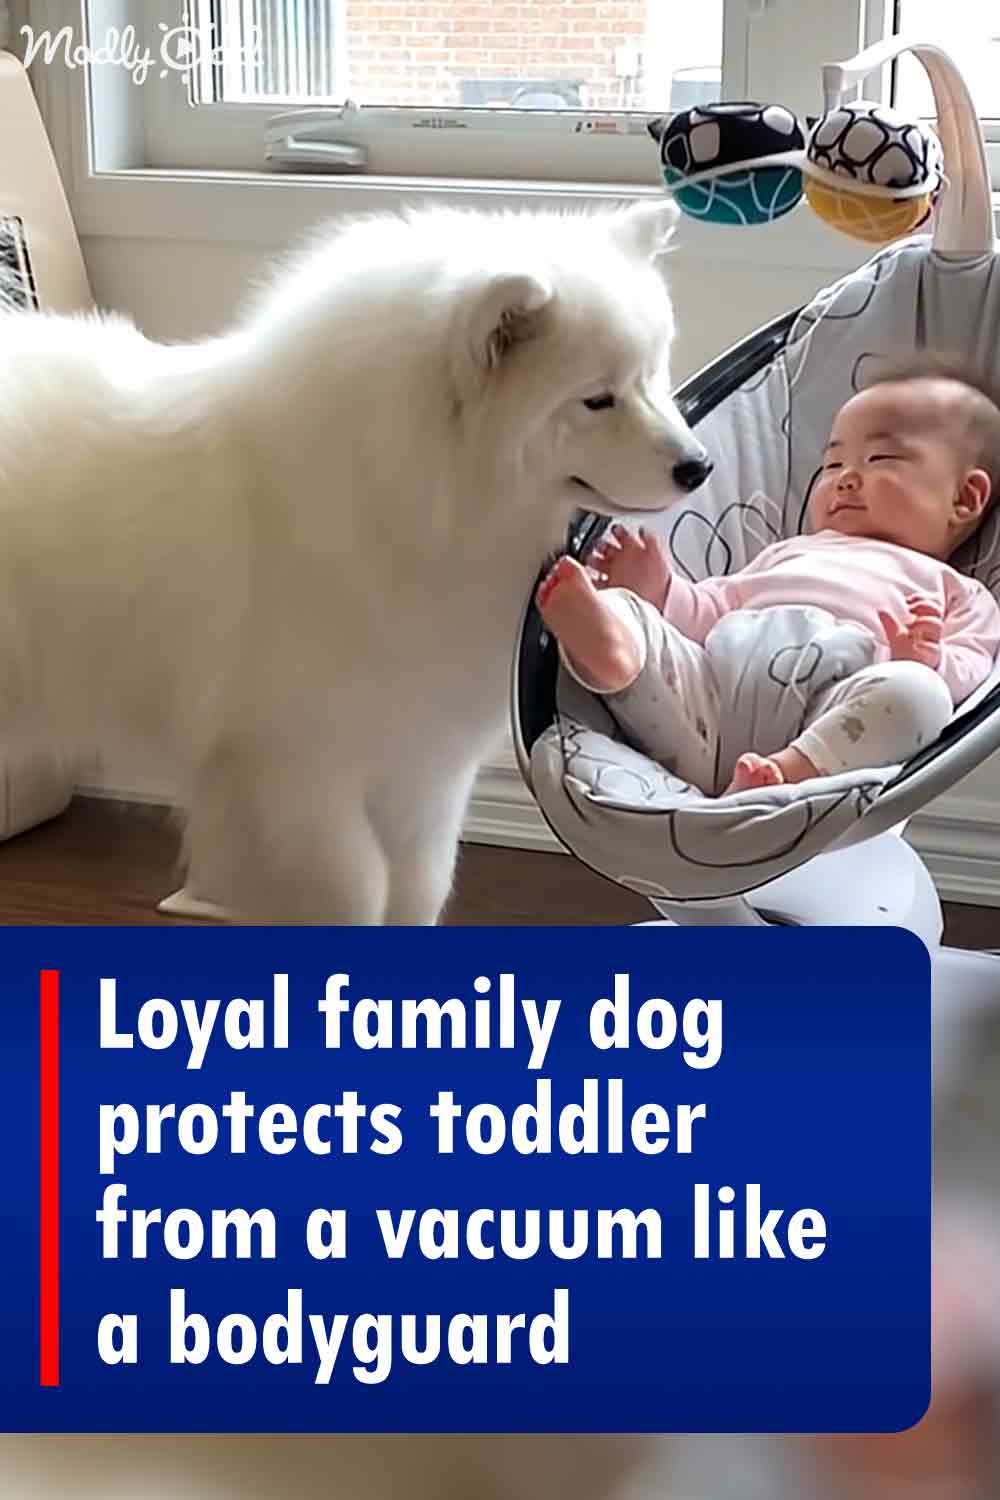 Loyal family dog protects toddler from a vacuum like a bodyguard